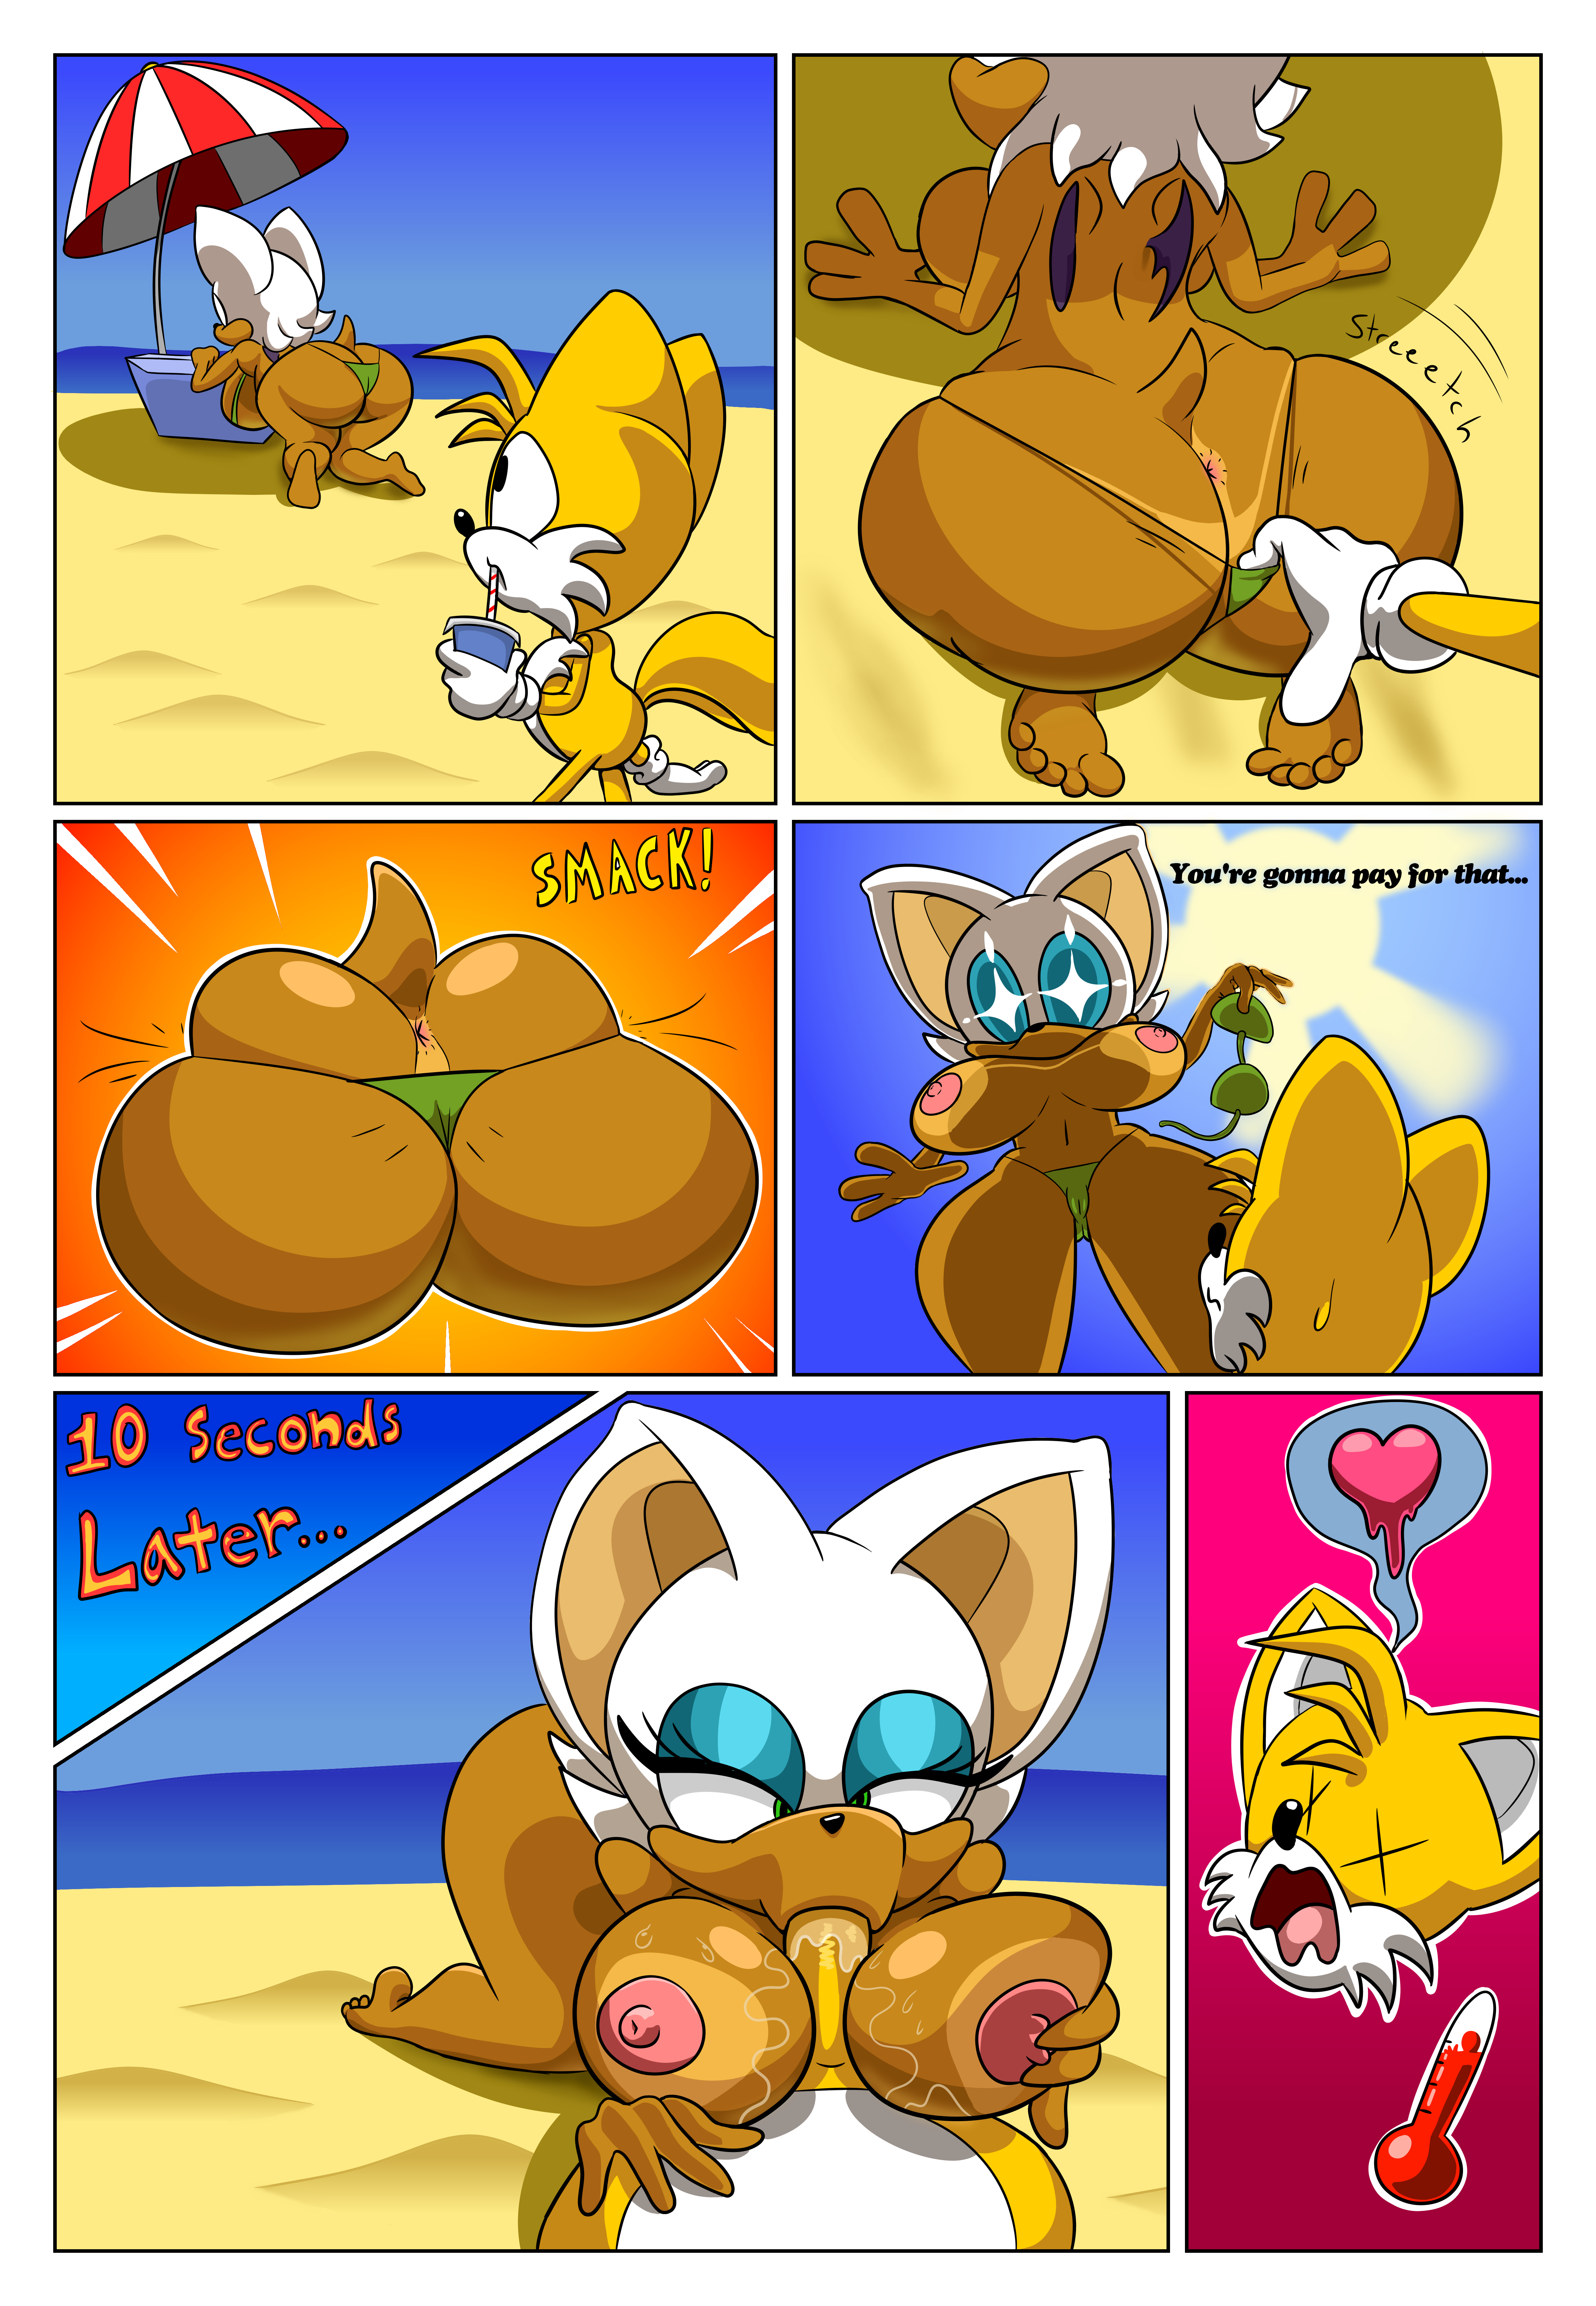 Rouge x tails rule 34